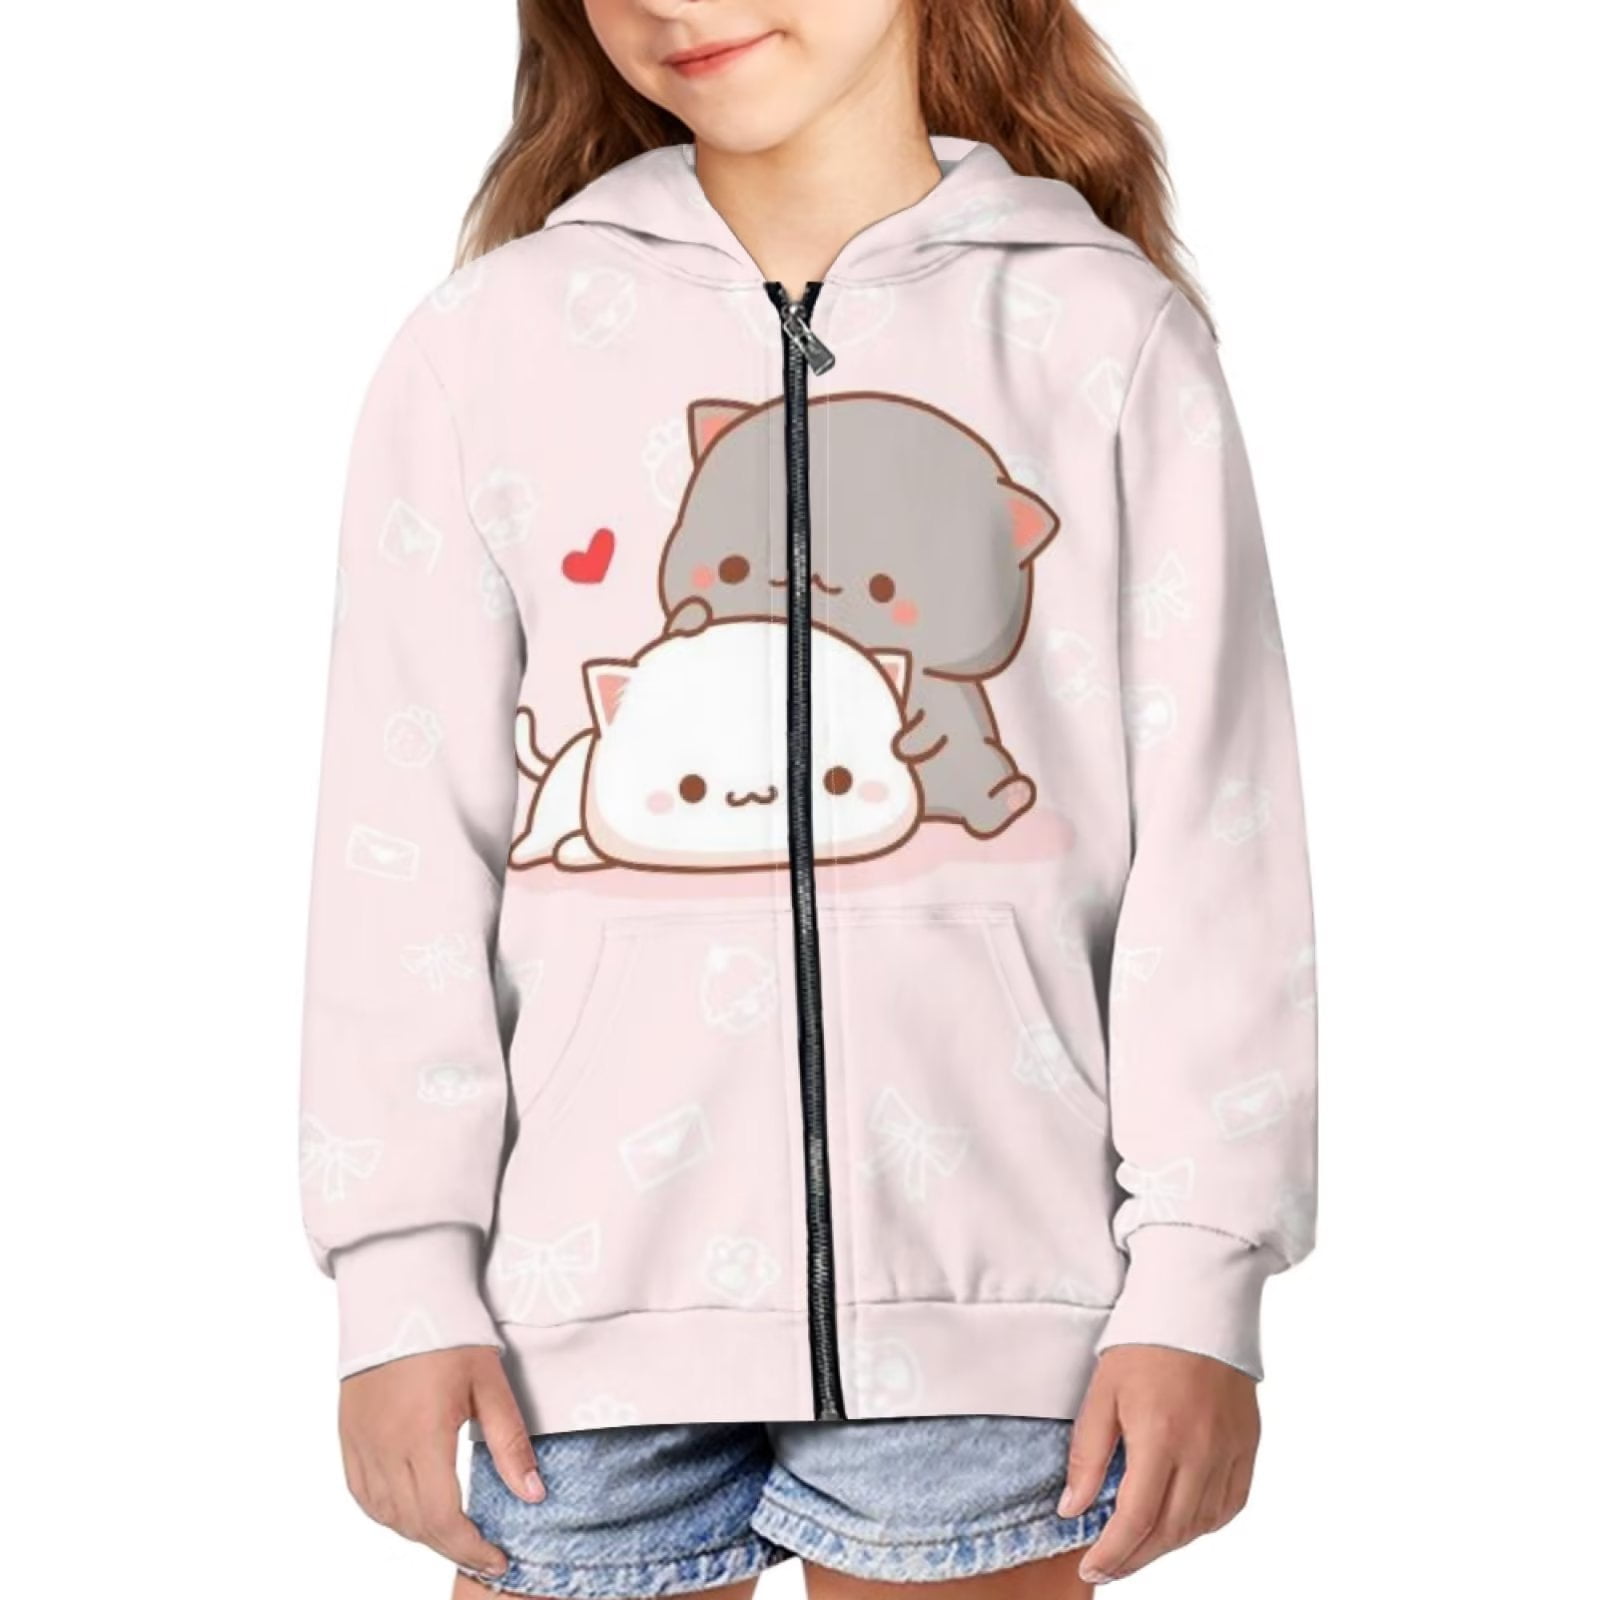 Renewold Strawberry Zipper Hoodies for Teen Girls Graphic Fall Clothes  Sweatshirts 11-13Y Cute Comfortable Crewneck Jacket with Hood Stylish Hoody  Tops Size 6-7 Years 